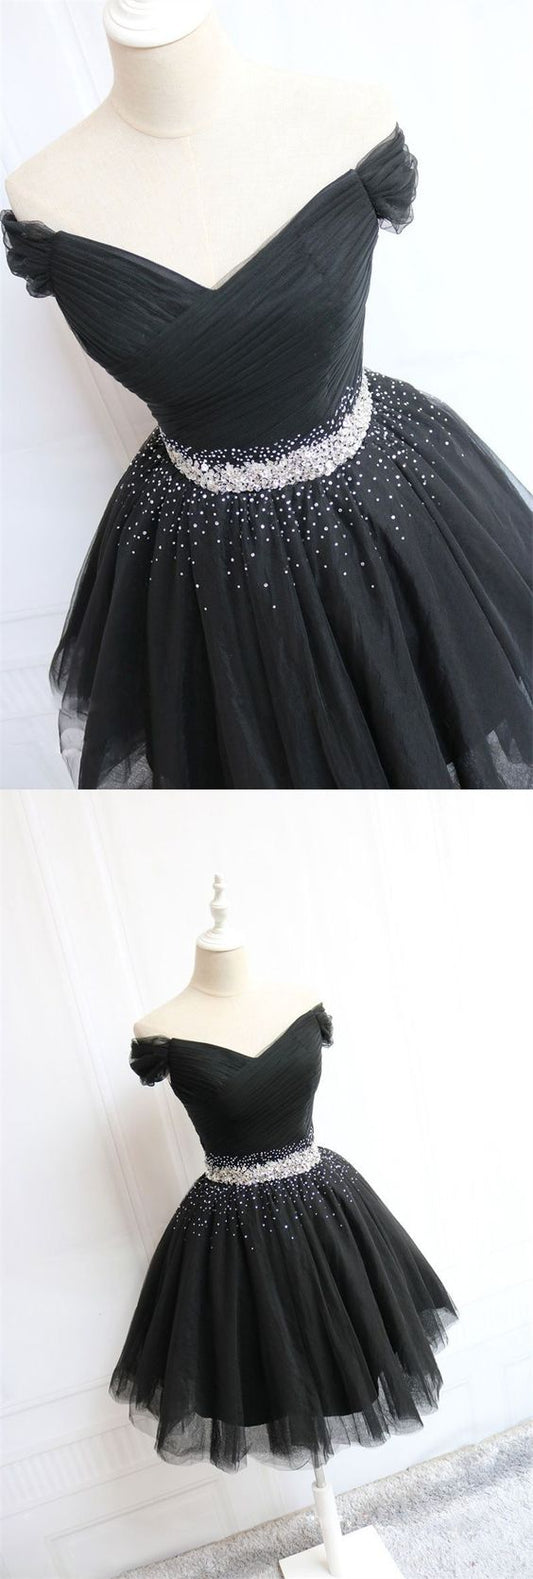 Simple Black Tulle Off Shoulder Short beaded Homecoming Dress   cg14517